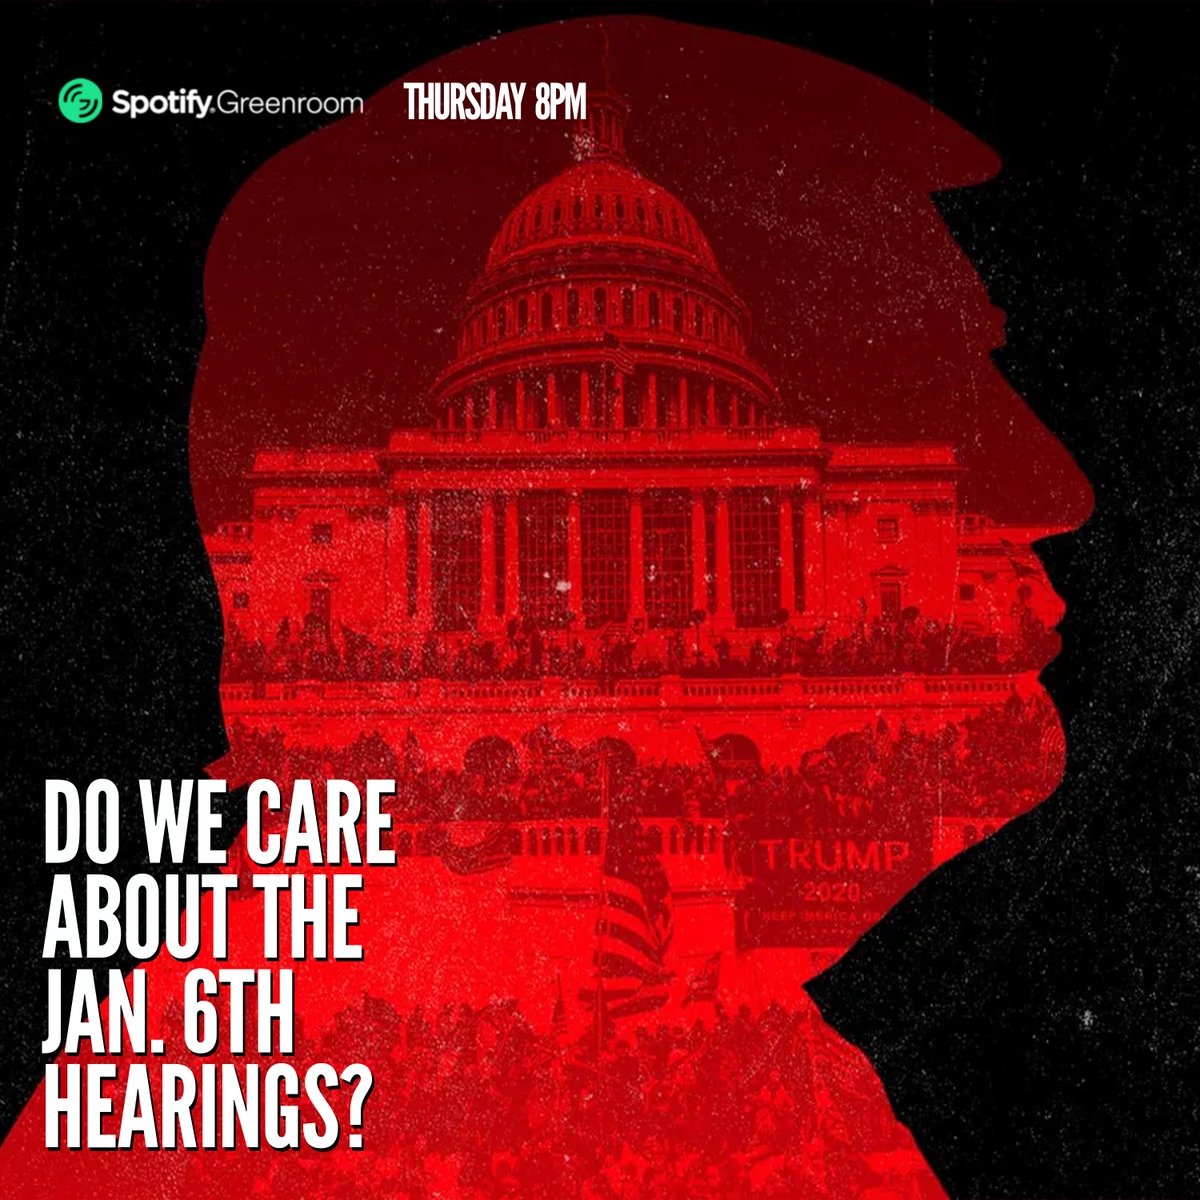 The Jan 6th Hearings have been front & center in the news cycle lately, but does the average American care? Will these hearings actually make a difference? We will tackle this and much more on tonight's live show on @SpotifyLive. Join us at 8pm EST: spotify.link/grapevinelive